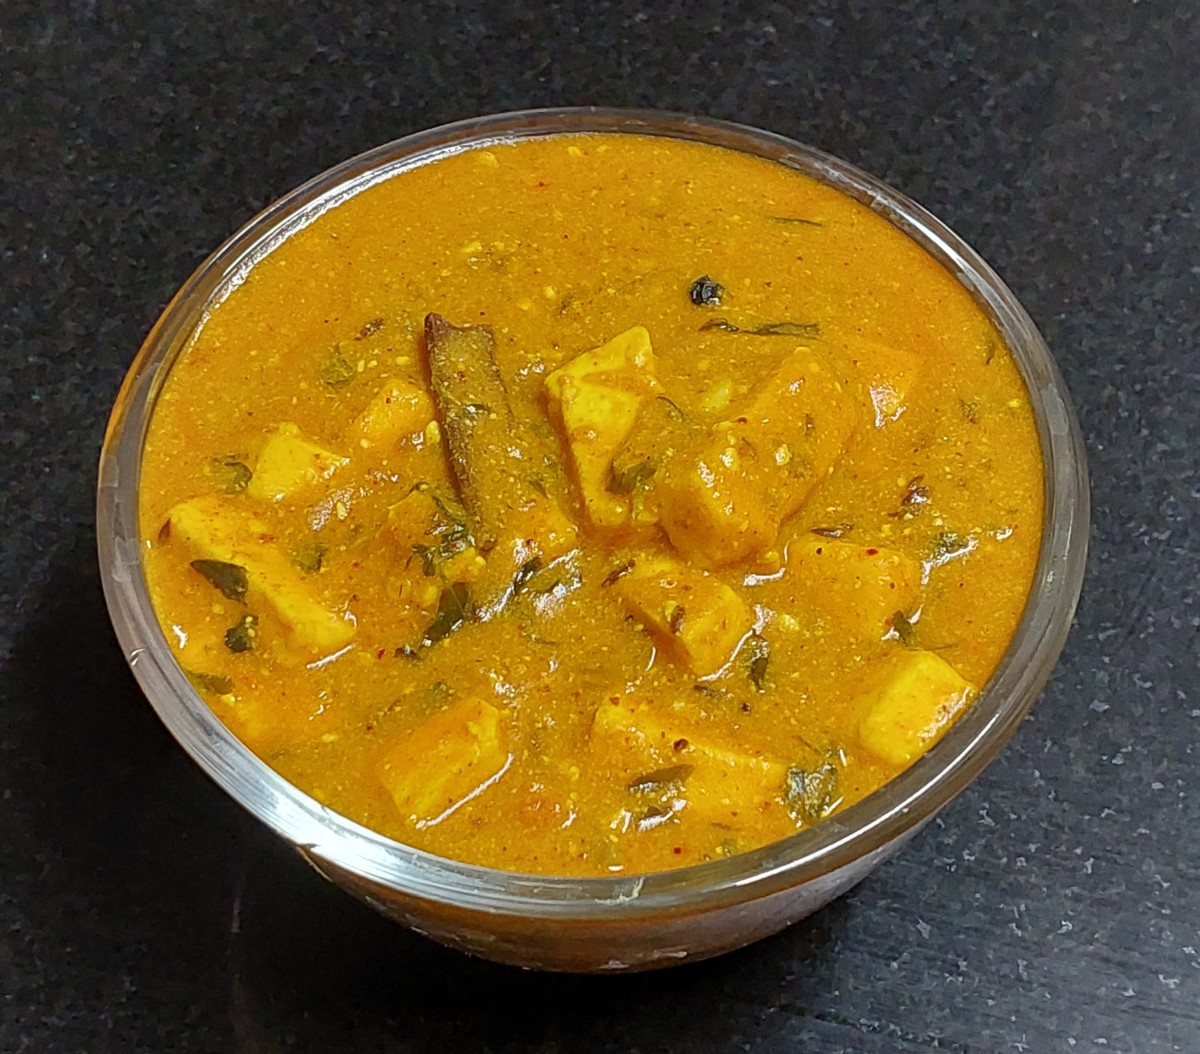 Easy and tasty paneer masala is ready to serve. Serve hot with roti, chapati, phulka or any flavored rice. Enjoy.